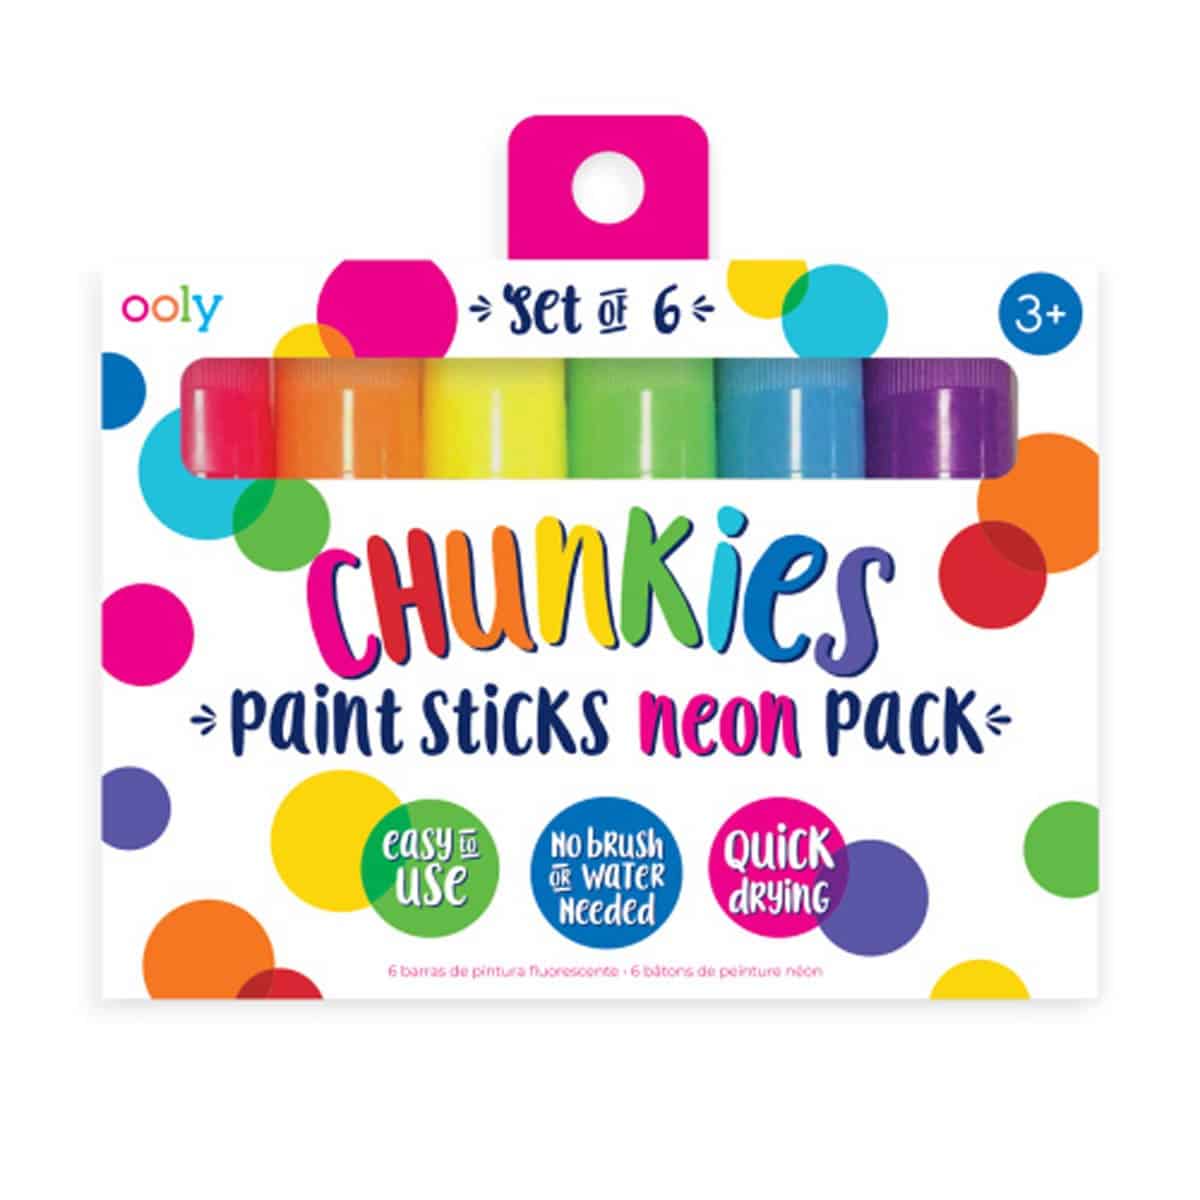 Ooly chunkies paint sticks - neon (set of 6) - The Present Factory